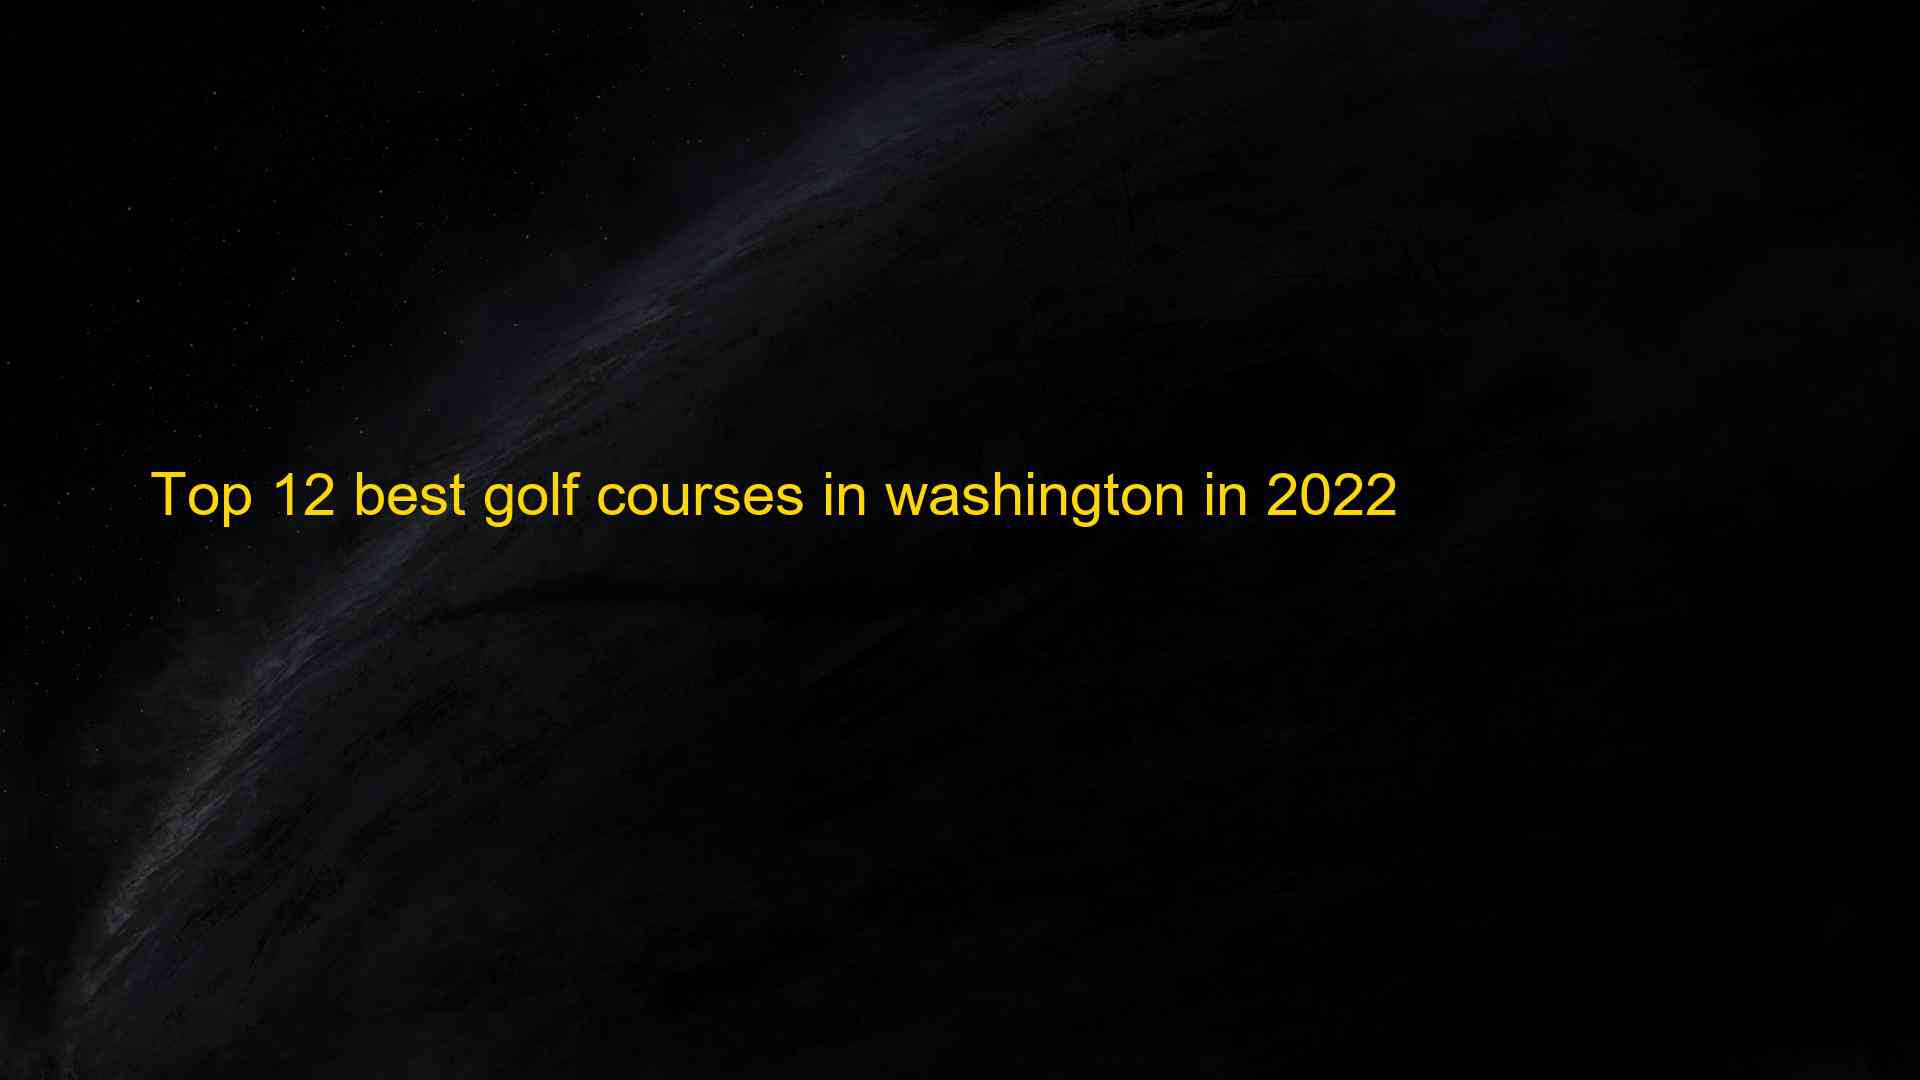 Top 12 best golf courses in washington in 2022 1660926480